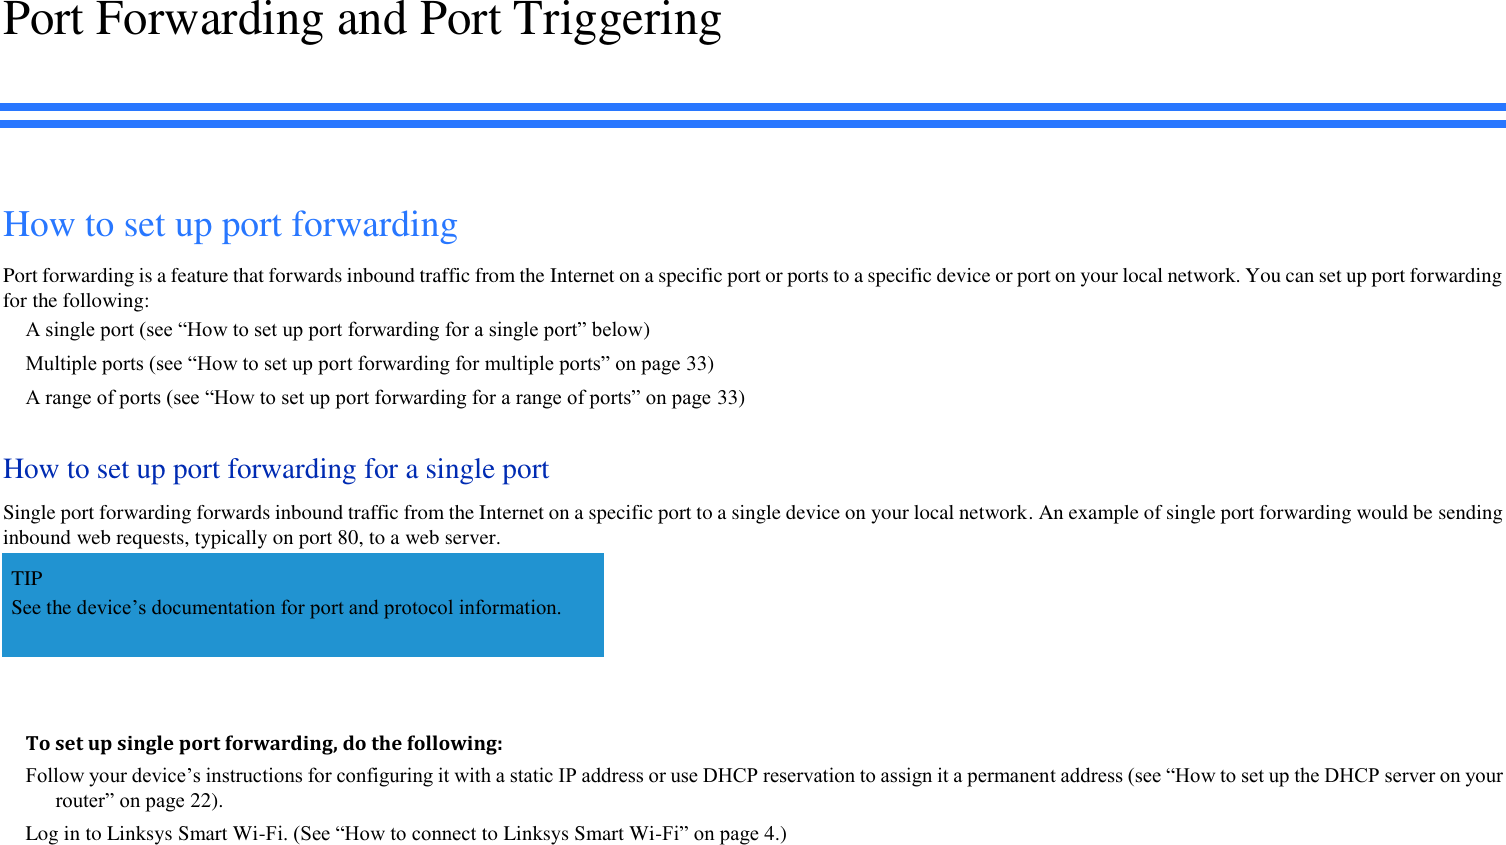 Port Forwarding and Port Triggering How to set up port forwarding Port forwarding is a feature that forwards inbound traffic from the Internet on a specific port or ports to a specific device or port on your local network. You can set up port forwarding for the following: A single port (see “How to set up port forwarding for a single port” below) Multiple ports (see “How to set up port forwarding for multiple ports” on page 33) A range of ports (see “How to set up port forwarding for a range of ports” on page 33) How to set up port forwarding for a single port Single port forwarding forwards inbound traffic from the Internet on a specific port to a single device on your local network. An example of single port forwarding would be sending inbound web requests, typically on port 80, to a web server.   TIP See the device’s documentation for port and protocol information.  To set up single port forwarding, do the following: Follow your device’s instructions for configuring it with a static IP address or use DHCP reservation to assign it a permanent address (see “How to set up the DHCP server on your router” on page 22). Log in to Linksys Smart Wi-Fi. (See “How to connect to Linksys Smart Wi-Fi” on page 4.) 